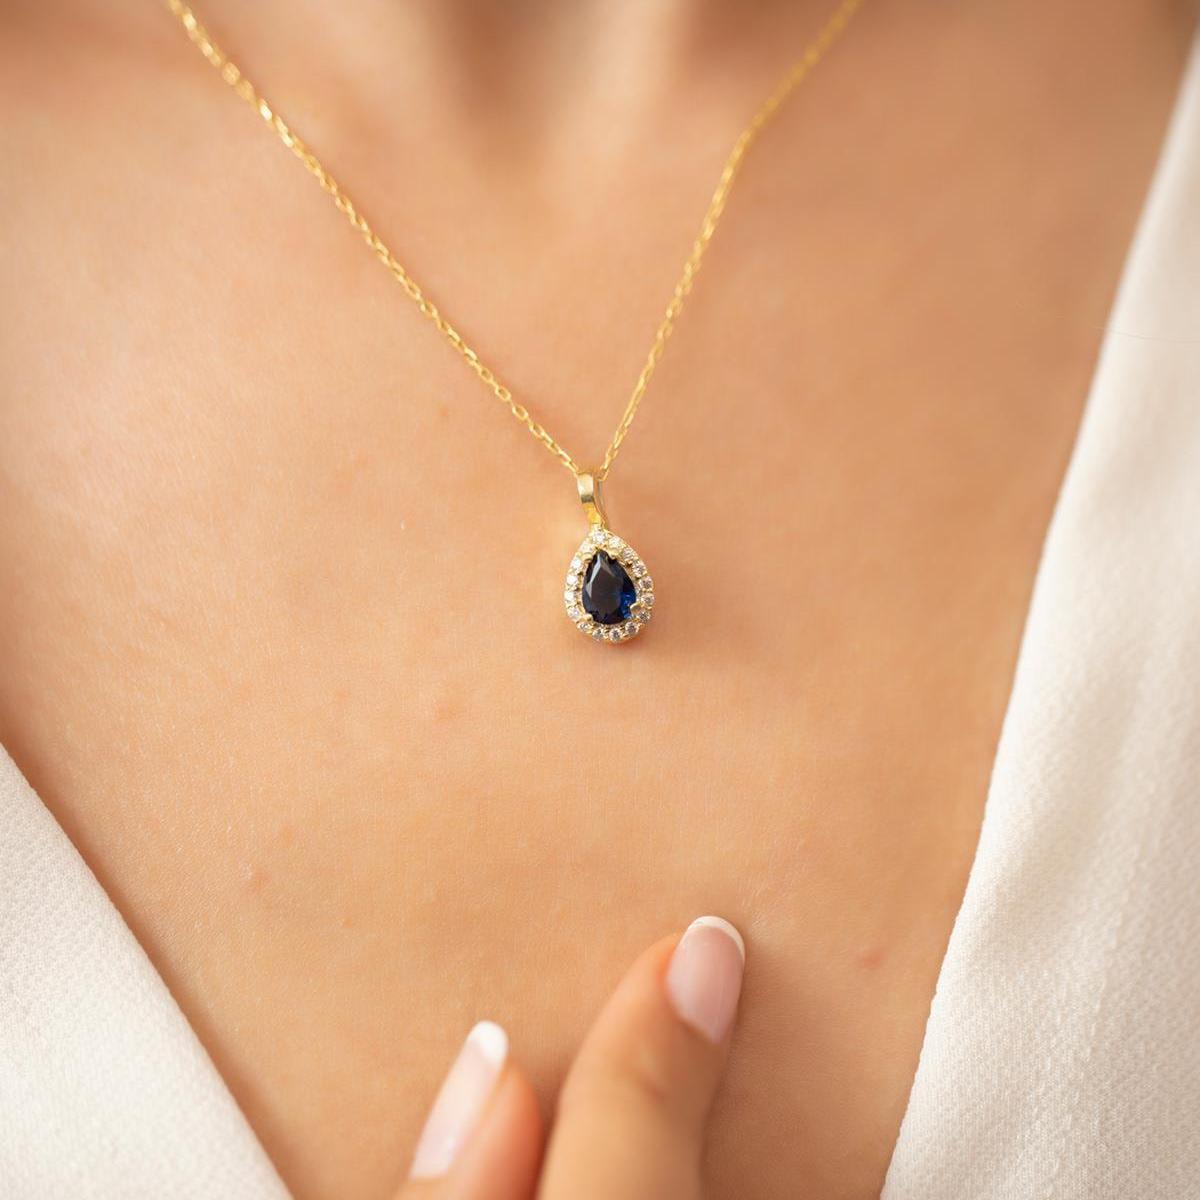 Sapphire Pendant Necklace • Birthstone Necklace For Mom • Gift For Mom - Trending Silver Gifts